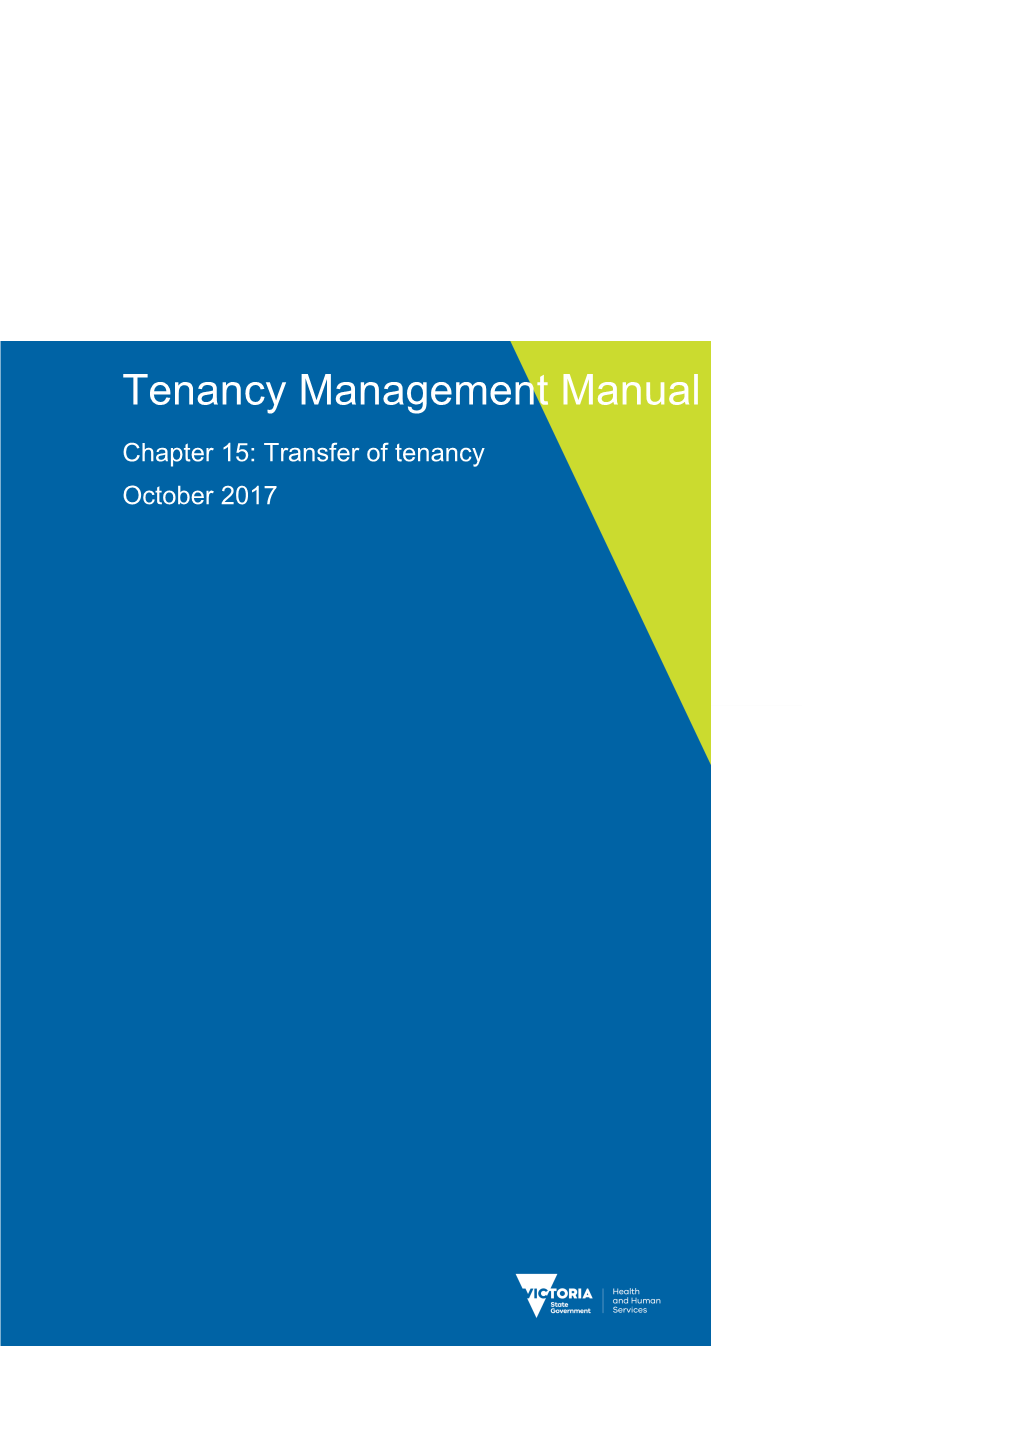 Tenancy Management Manual Chapter 15: Transfer of Tenancy